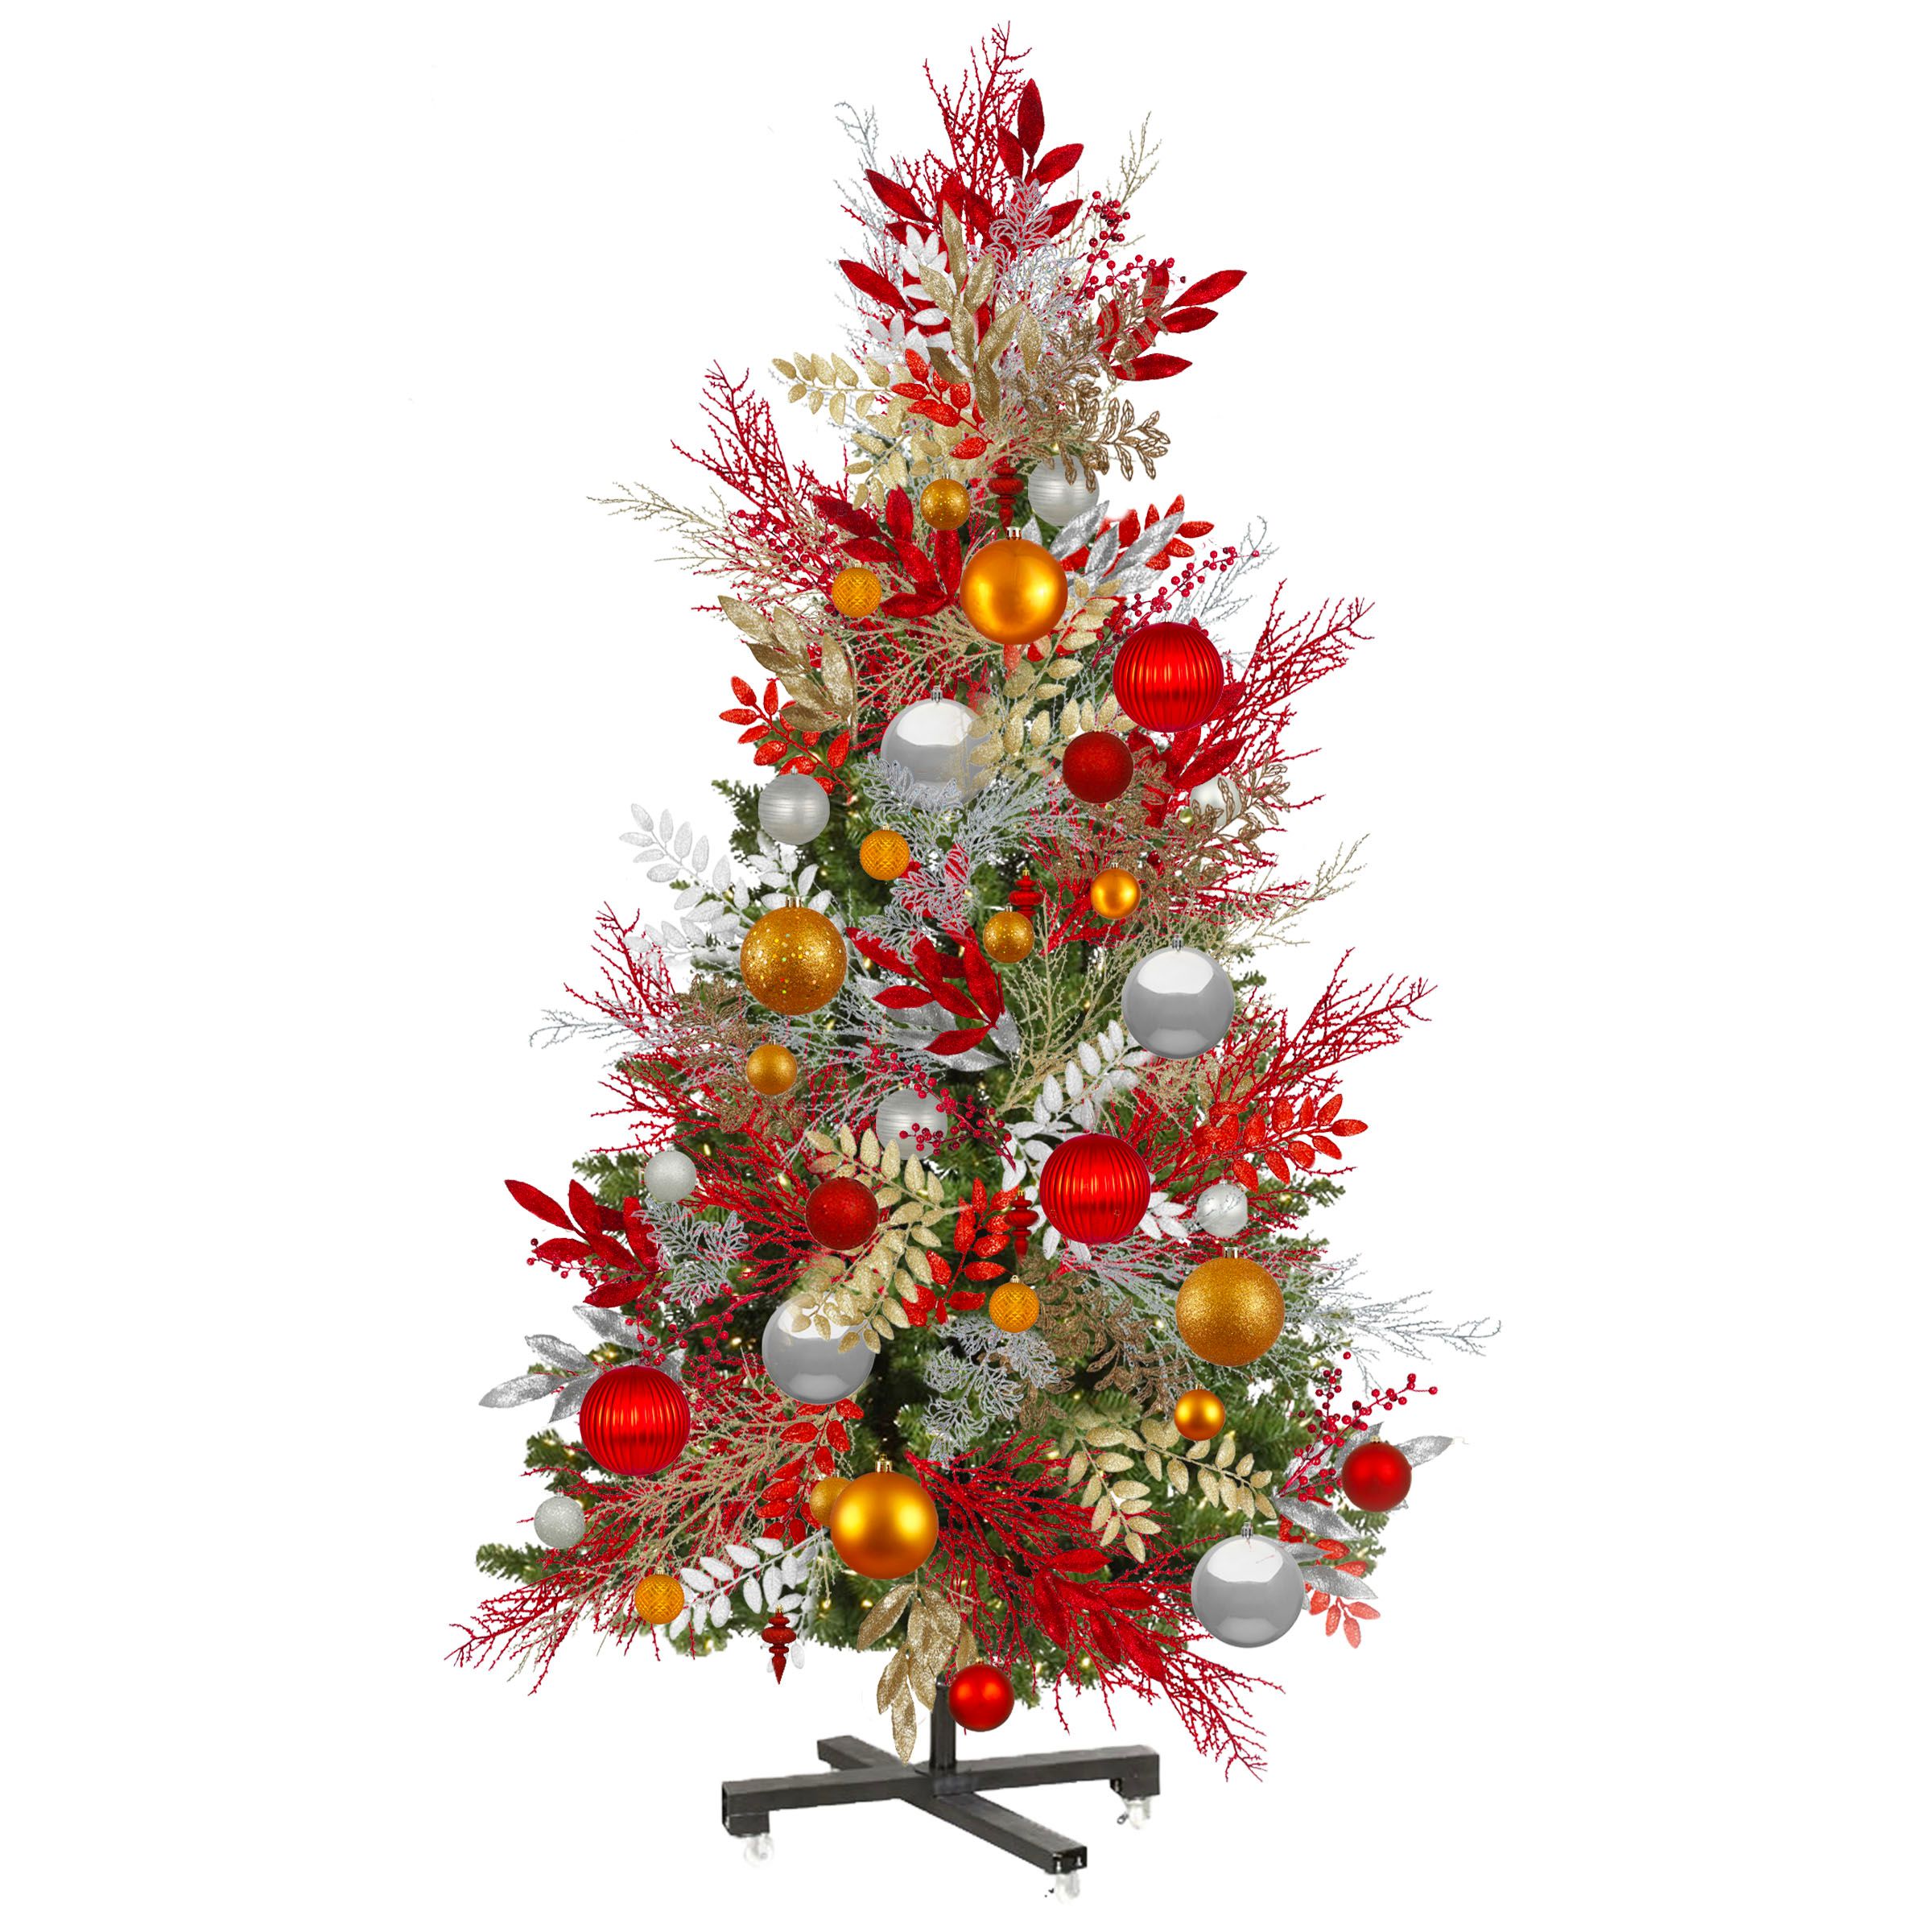 Festive Favorites - A Gold, Red, & Silver Christmas Tree